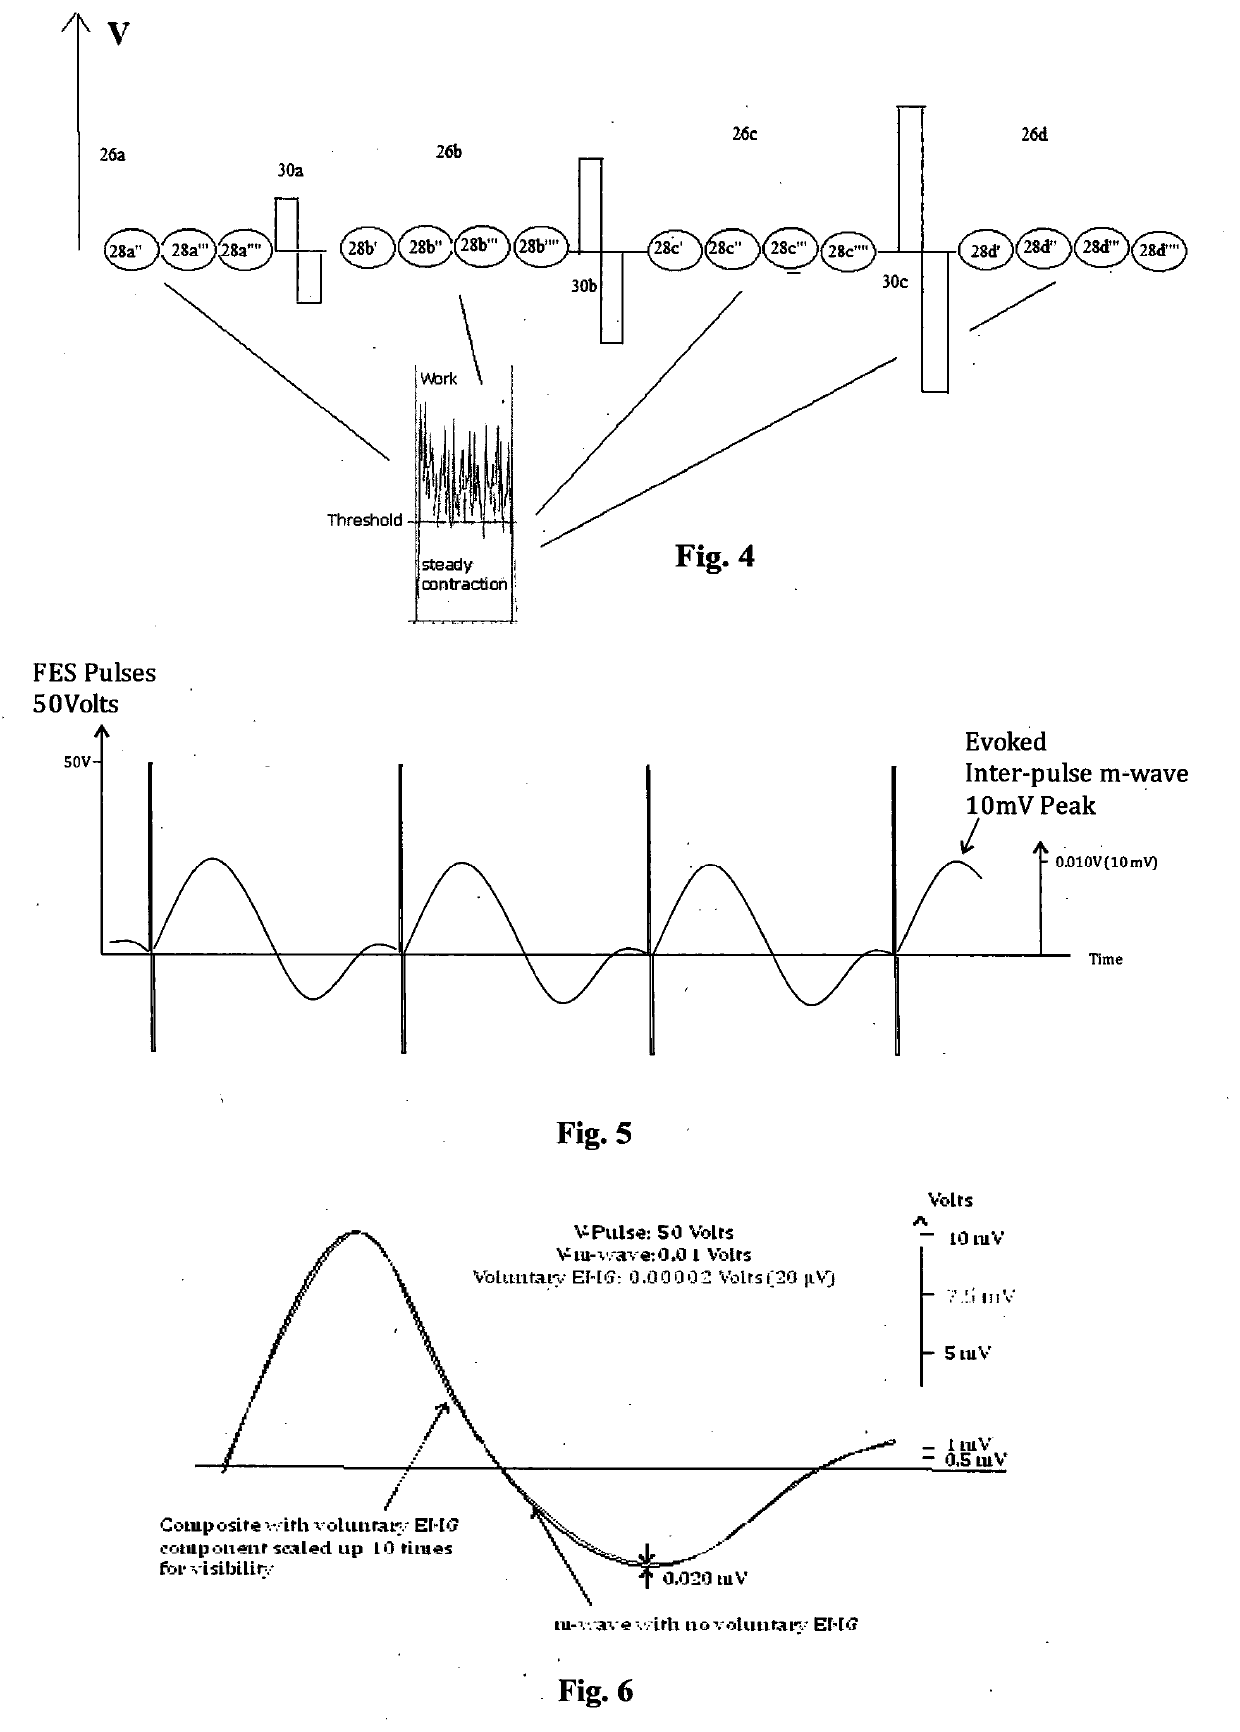 Apparatus for neuromuscular stimulation